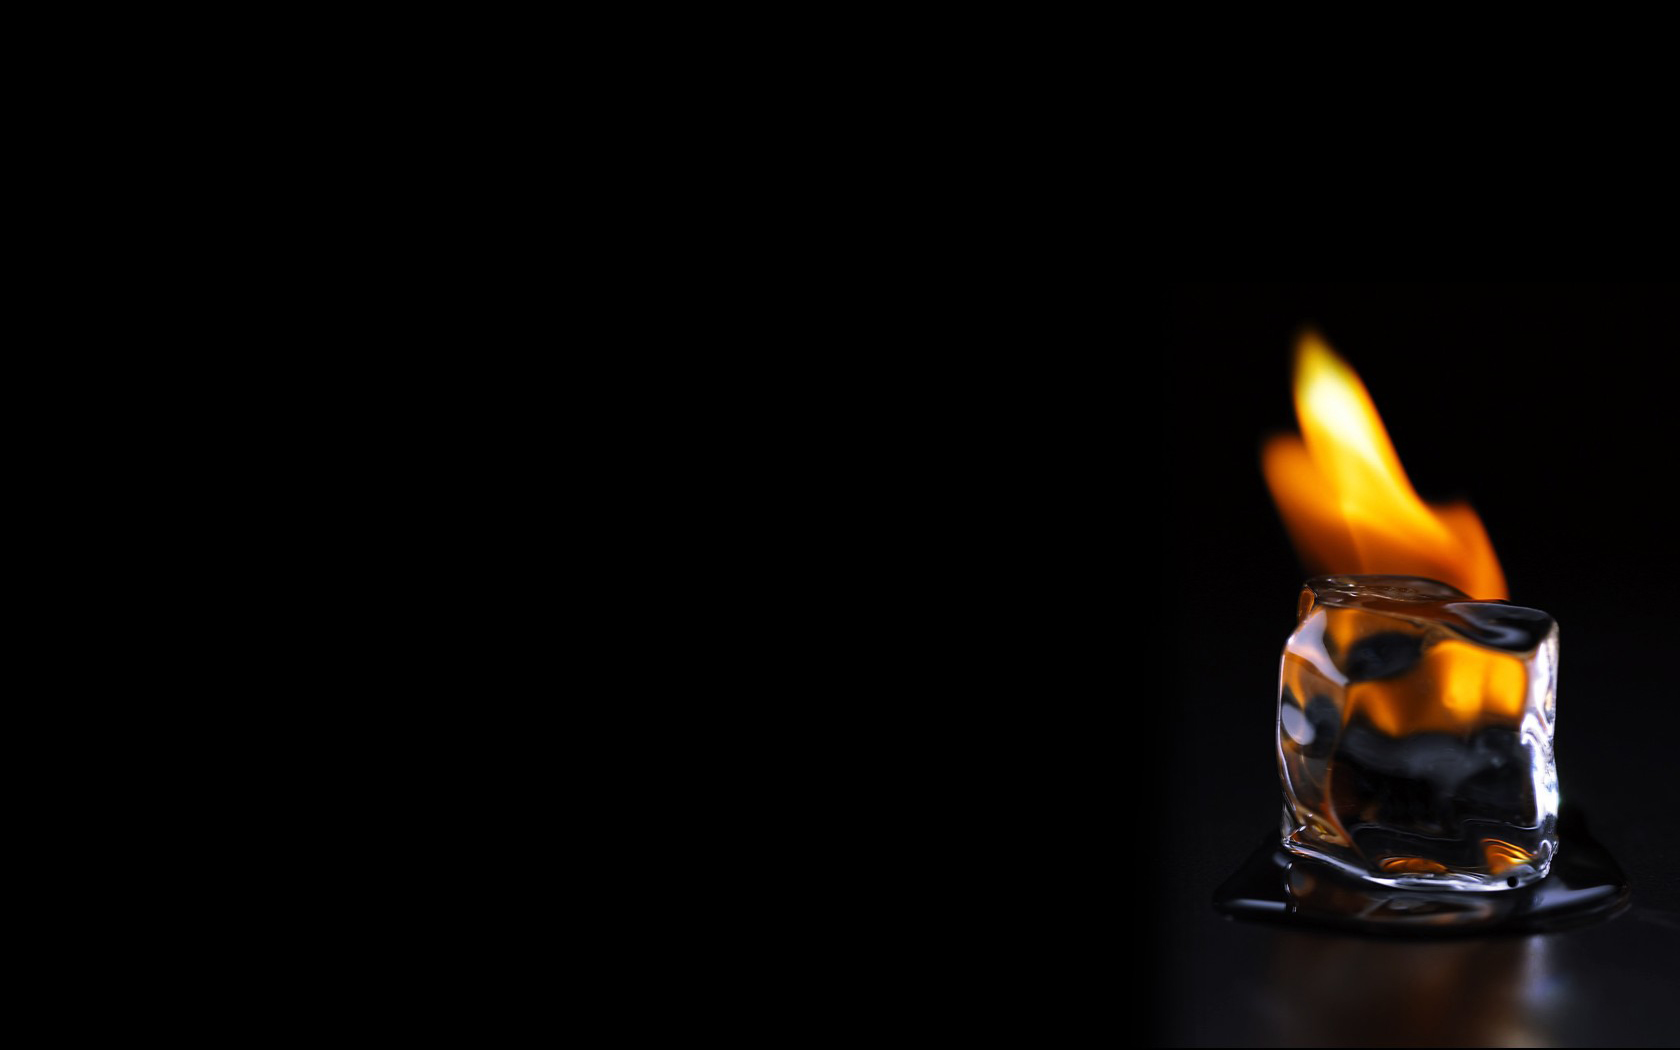 Posted in Wallpapers | Tagged black, cold, cube, fire, flame, ice, melt, 